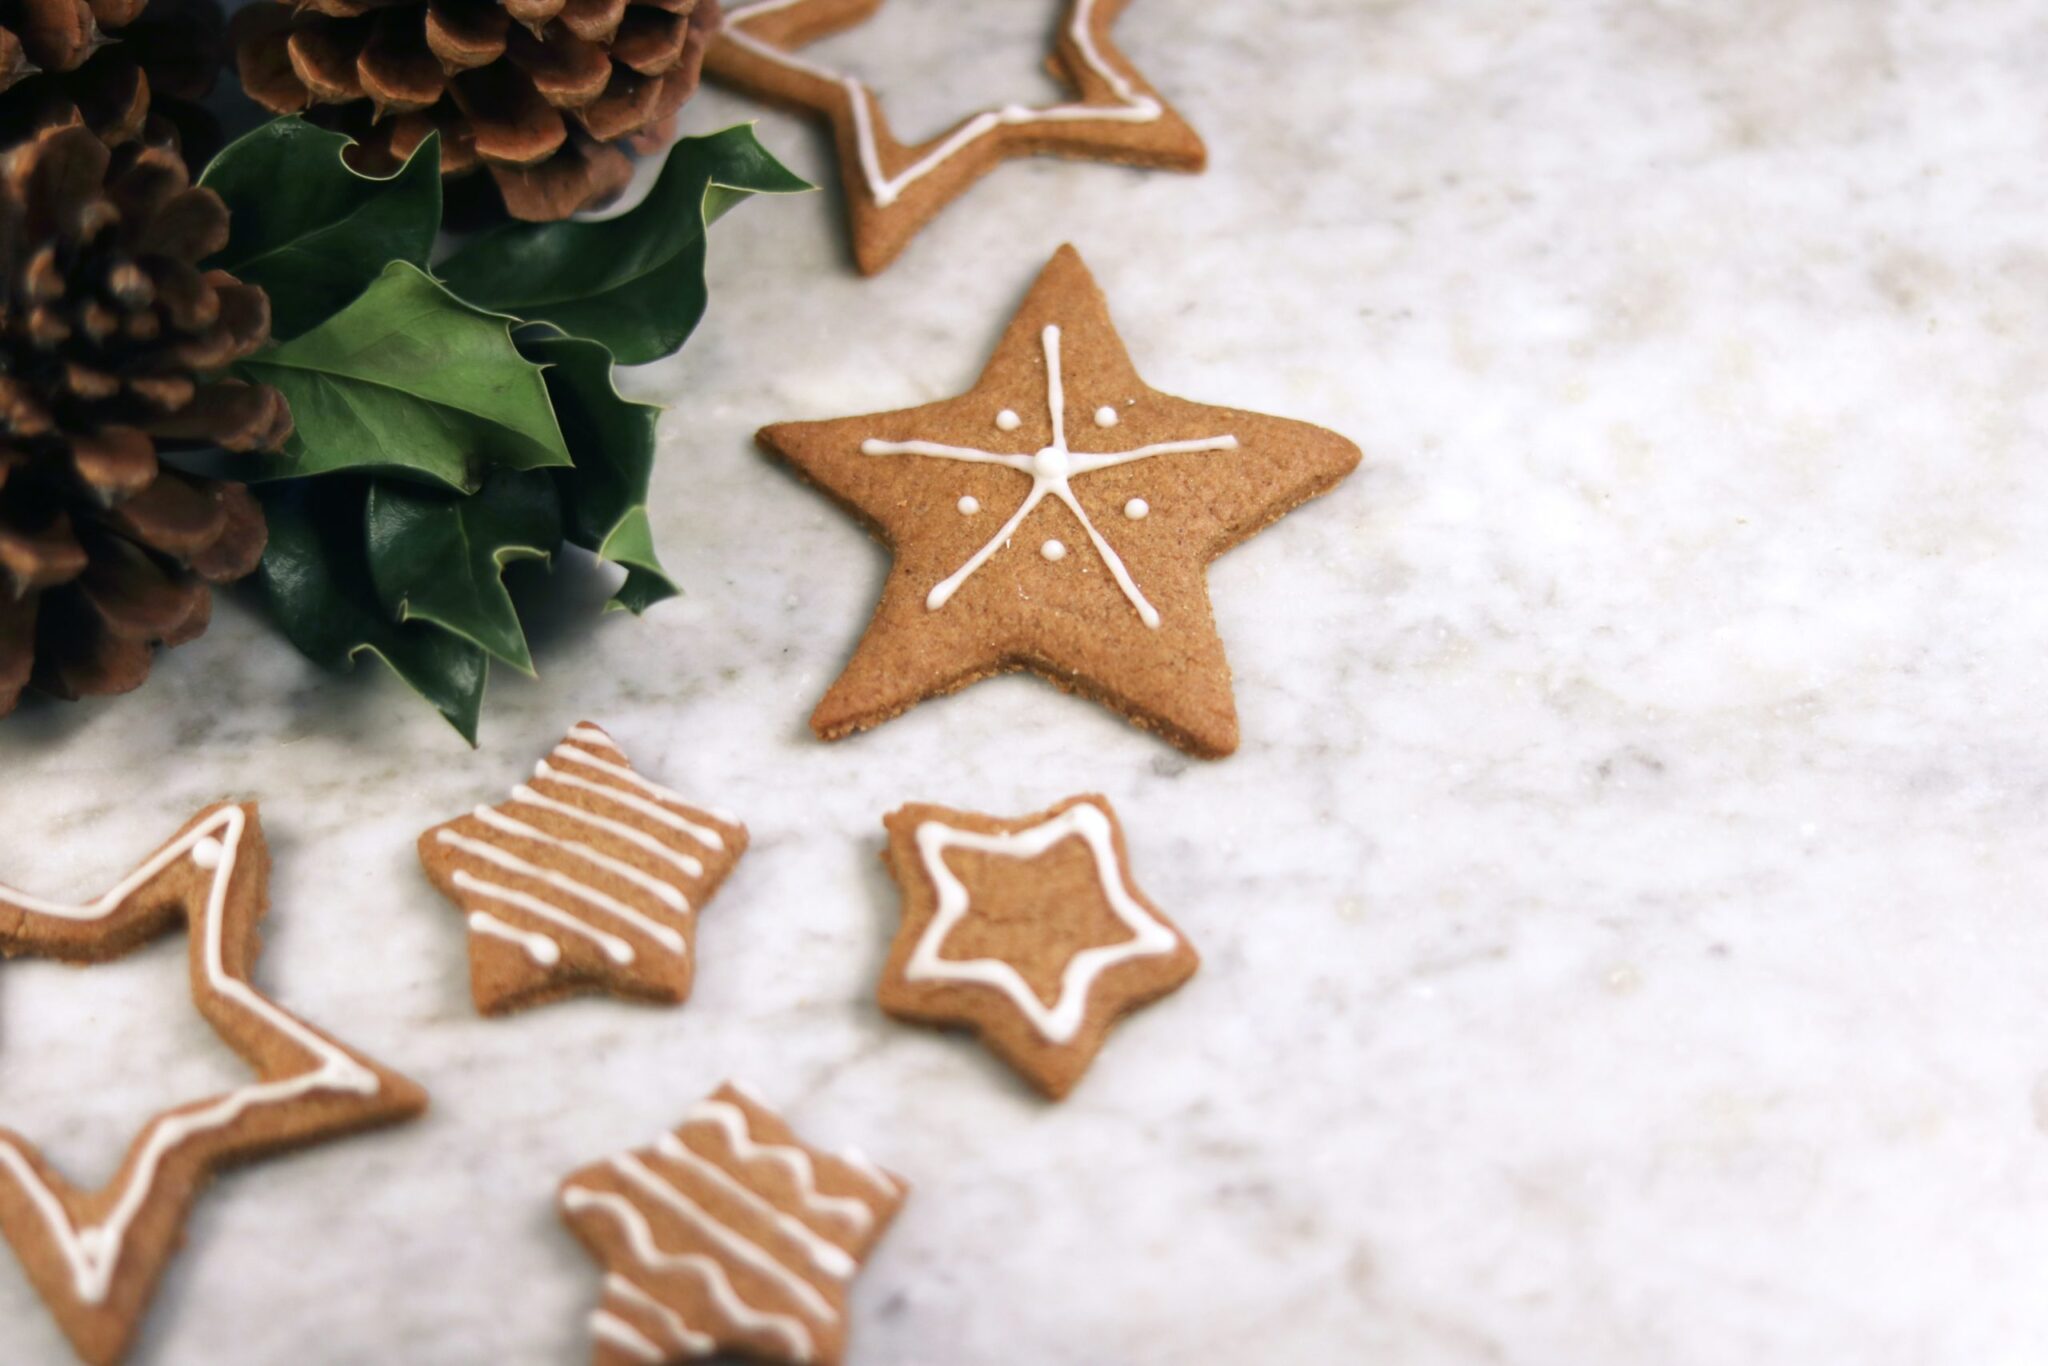 Recipes: 3 Edibles Perfect For The Holidays